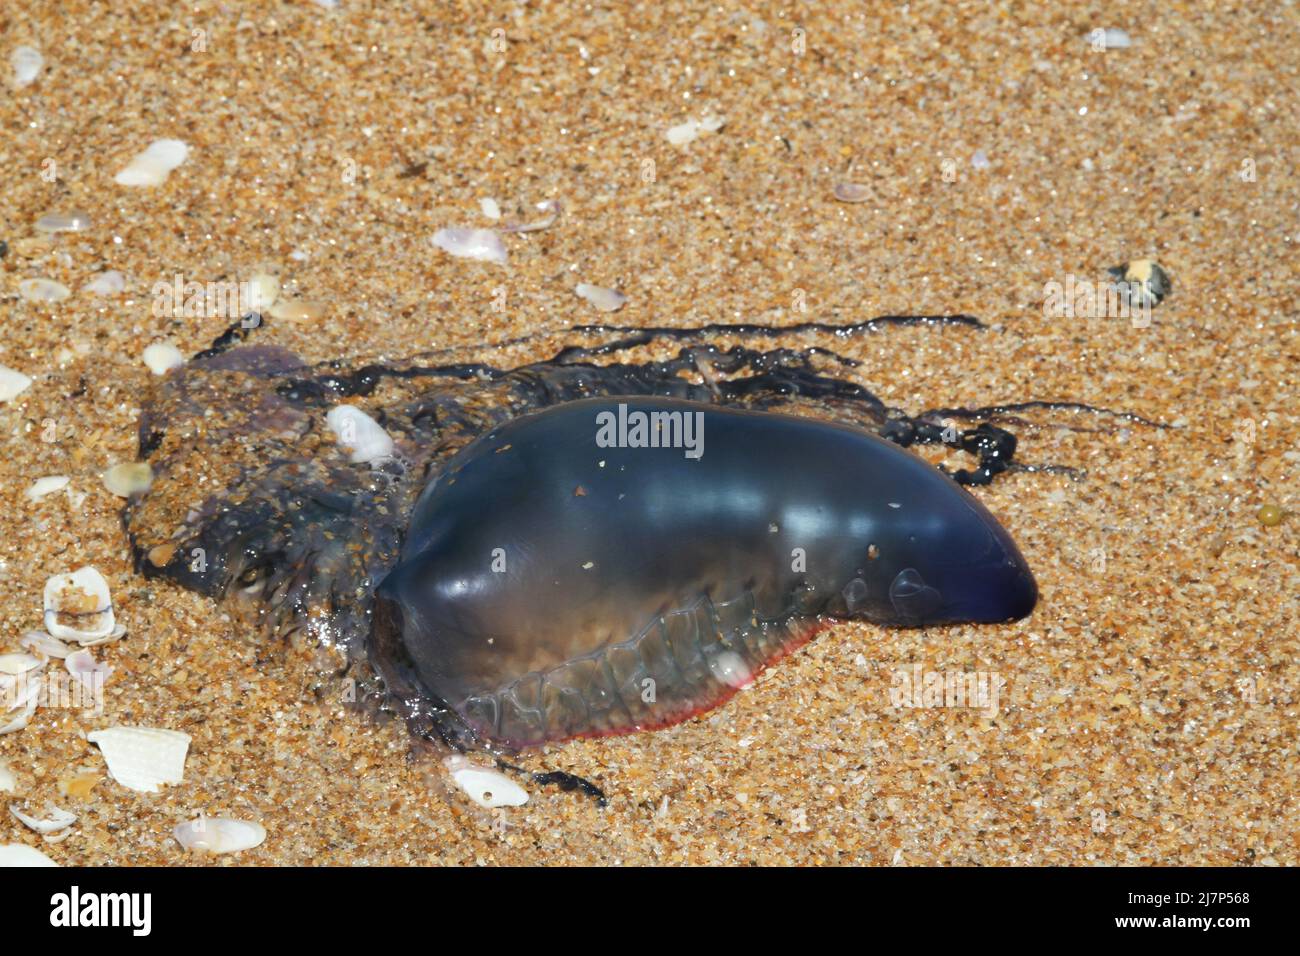 Poisonous tentacles beside dangerous bluebottle Portuguese man o' war jellyfish animal on sand beach  images Stock Photo